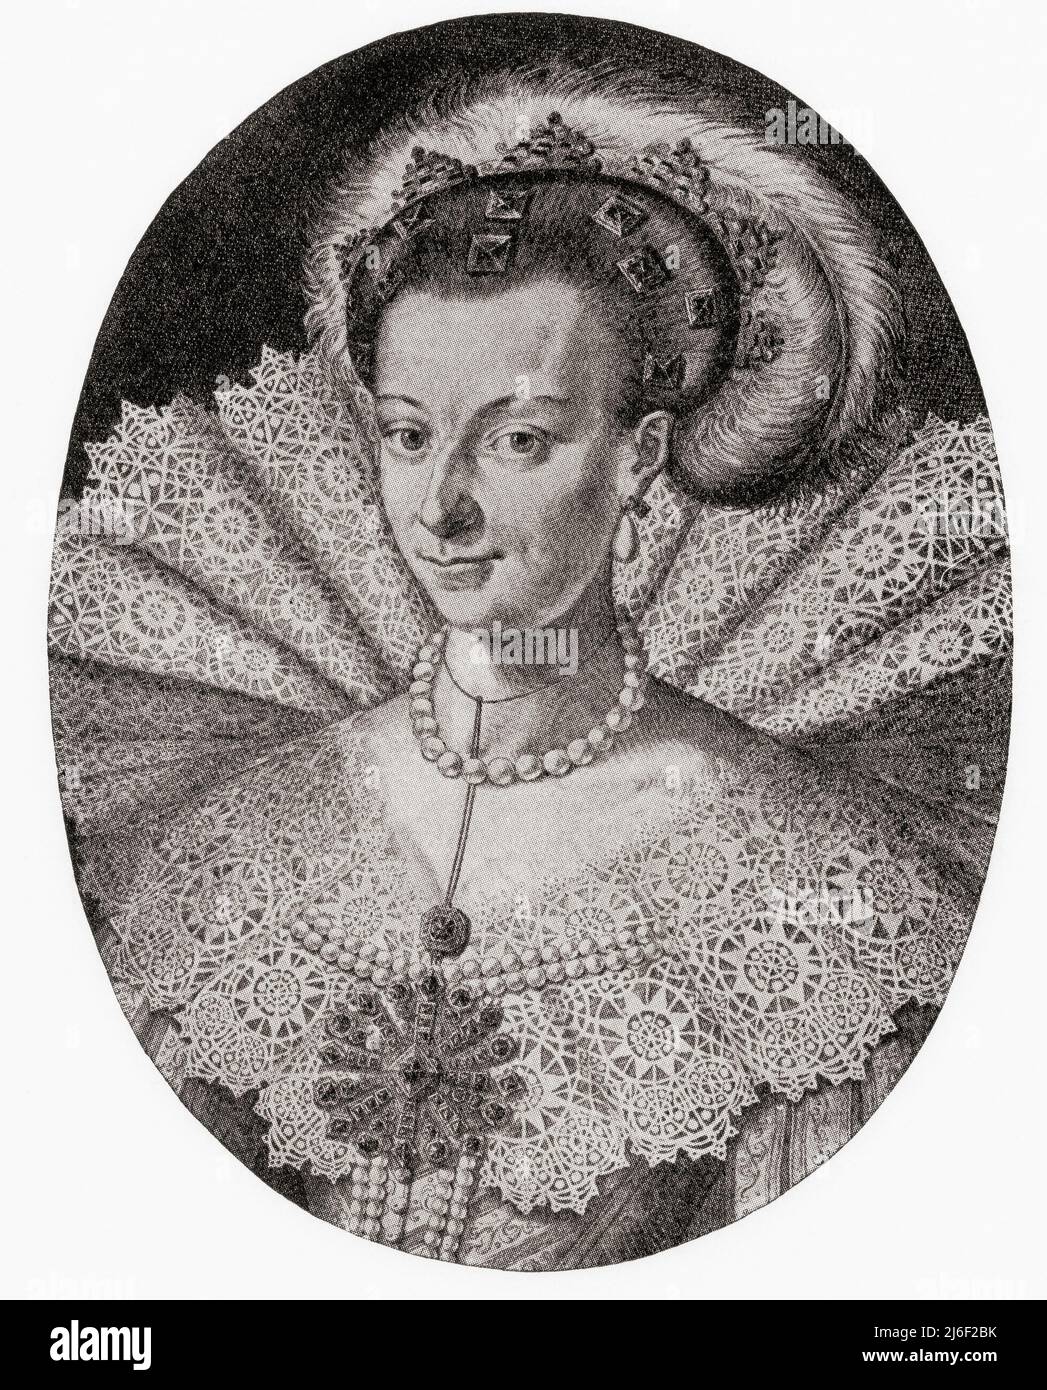 Maria Eleonora of Brandenburg, 1599 – 1655. German princess and Queen Consort of Sweden as the wife of King Gustav II Adolph.  From Modes and Manners, published 1935. Stock Photo